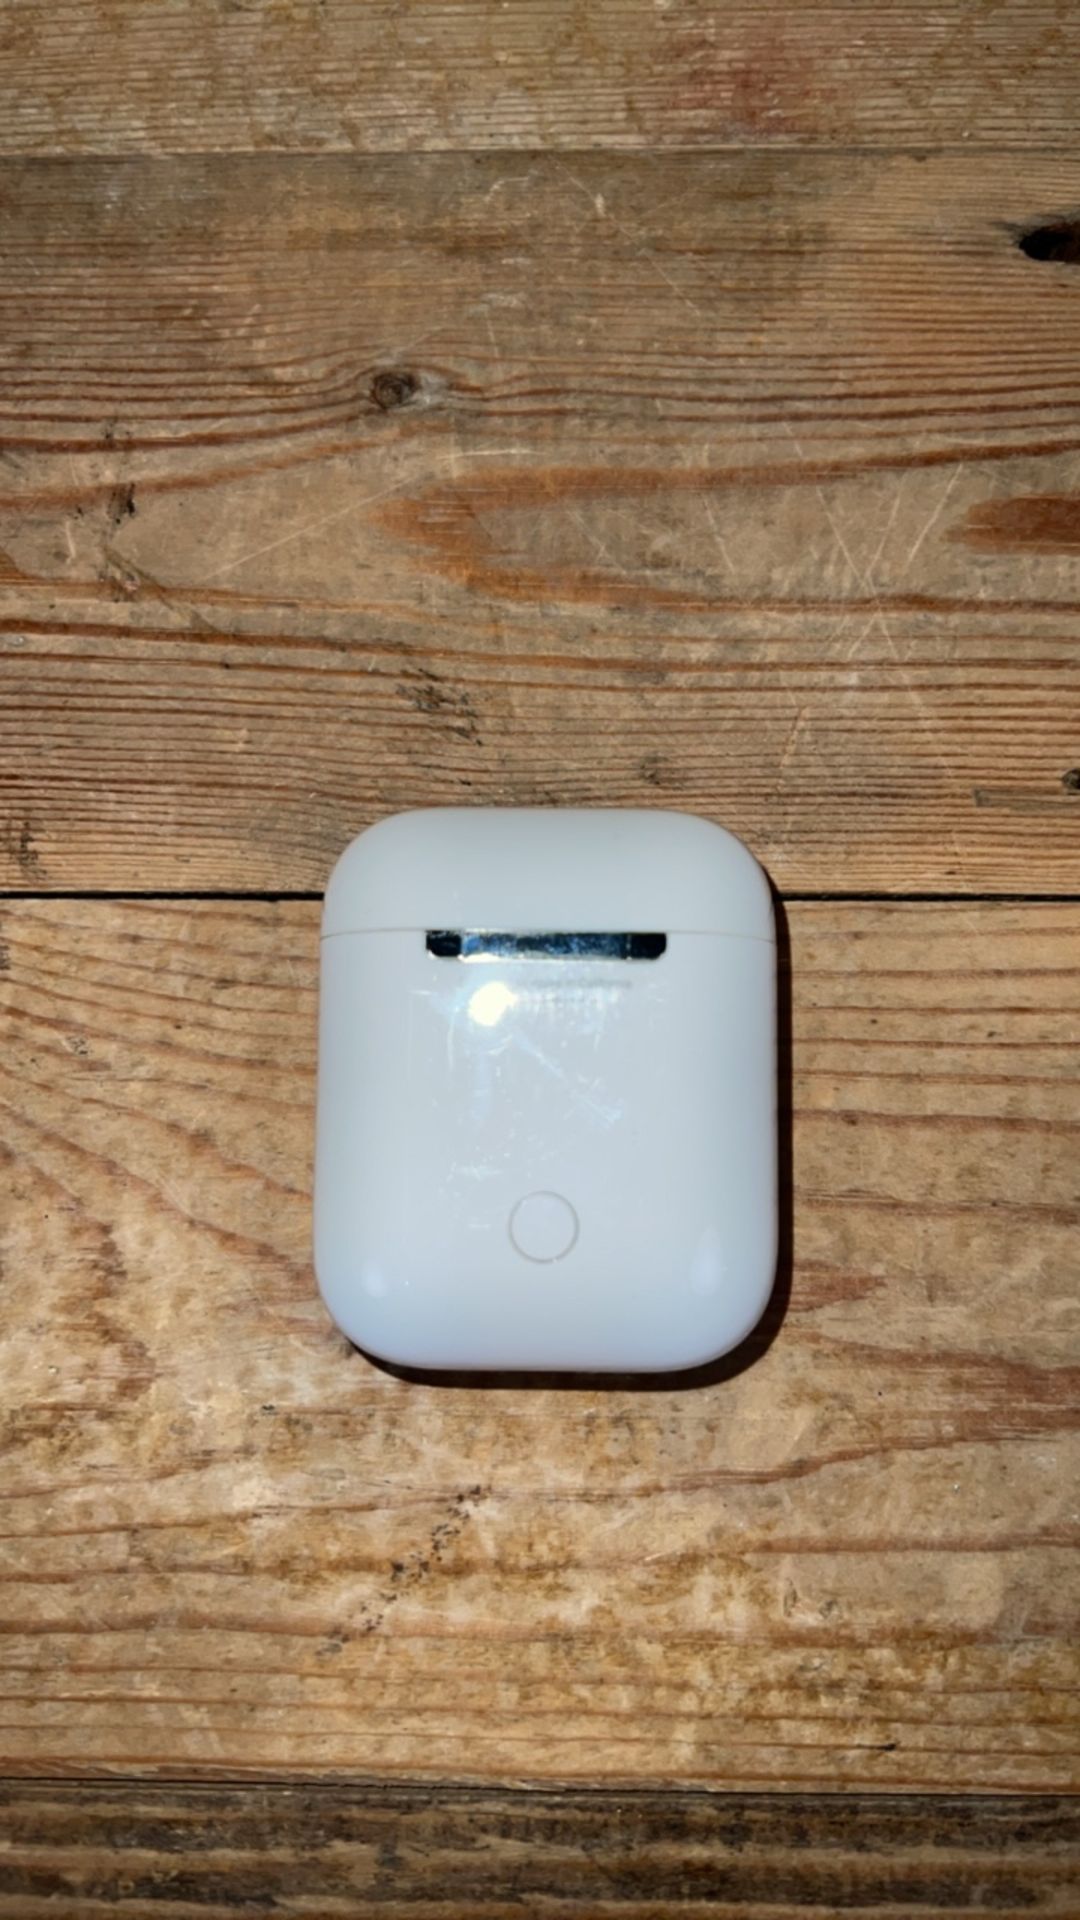 Apple Air Pods Charging Case Included - Image 4 of 5